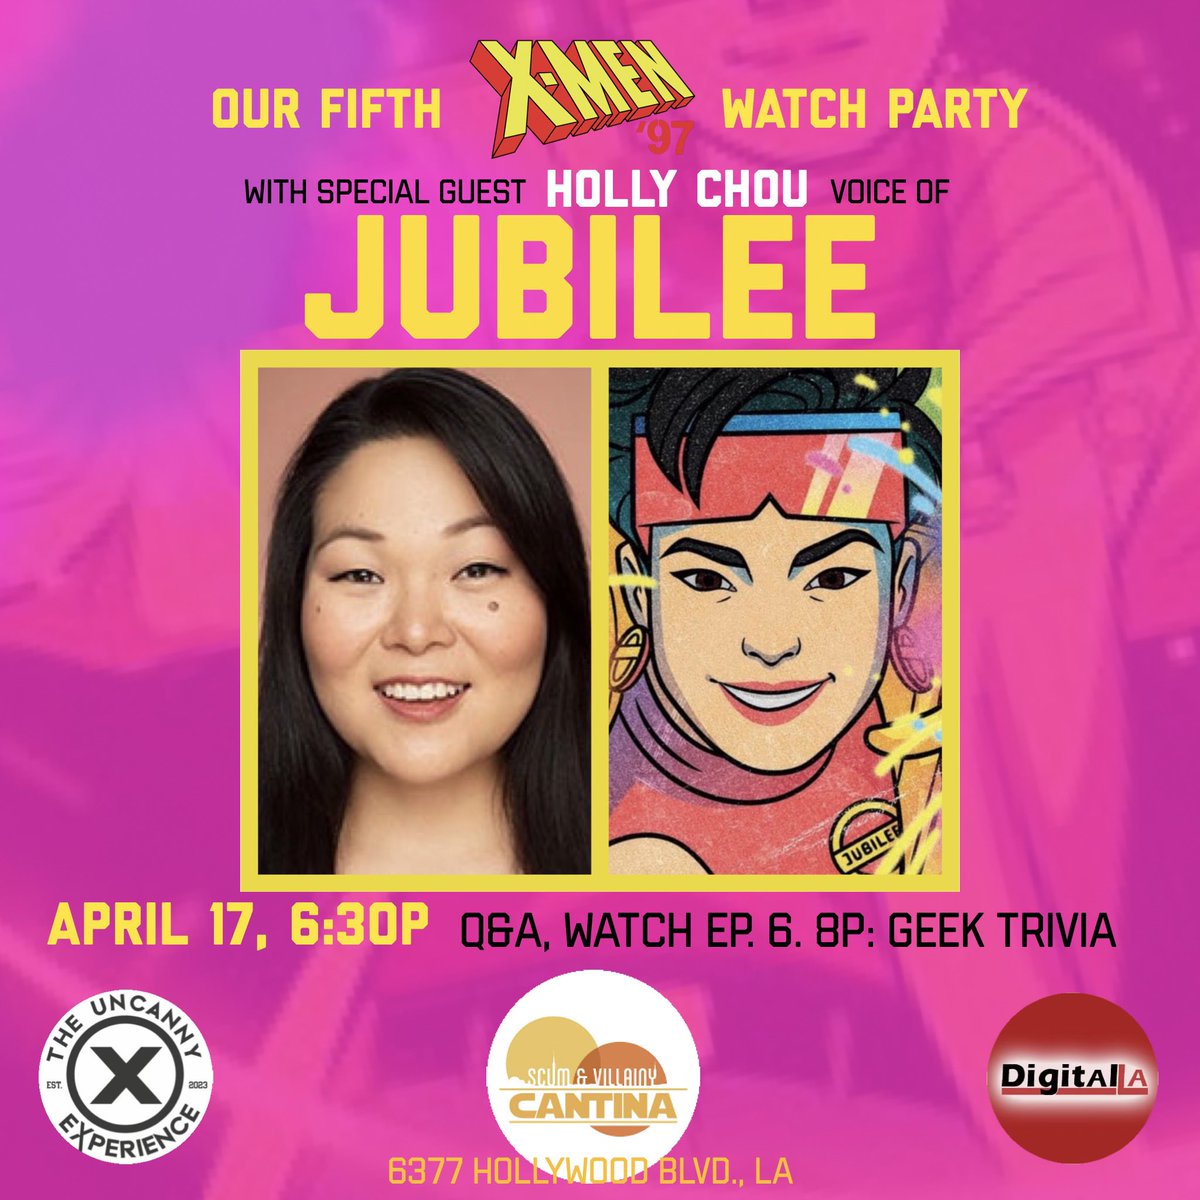 ❌ Join our watch party for the NEW #XMen97 ep “Lifedeath - Part 2” w/ guest @holycowhollych the voice of #Jubilee 4/17 at 6:30pm at Scum & Villainy Cantina in Hollywood! W/ a Q&A 🙋‍♂️Screening 📺 & group photo 📸 Presented by: @TheUncannyEXP & @DigitalLA See U there, mutants! 🎆